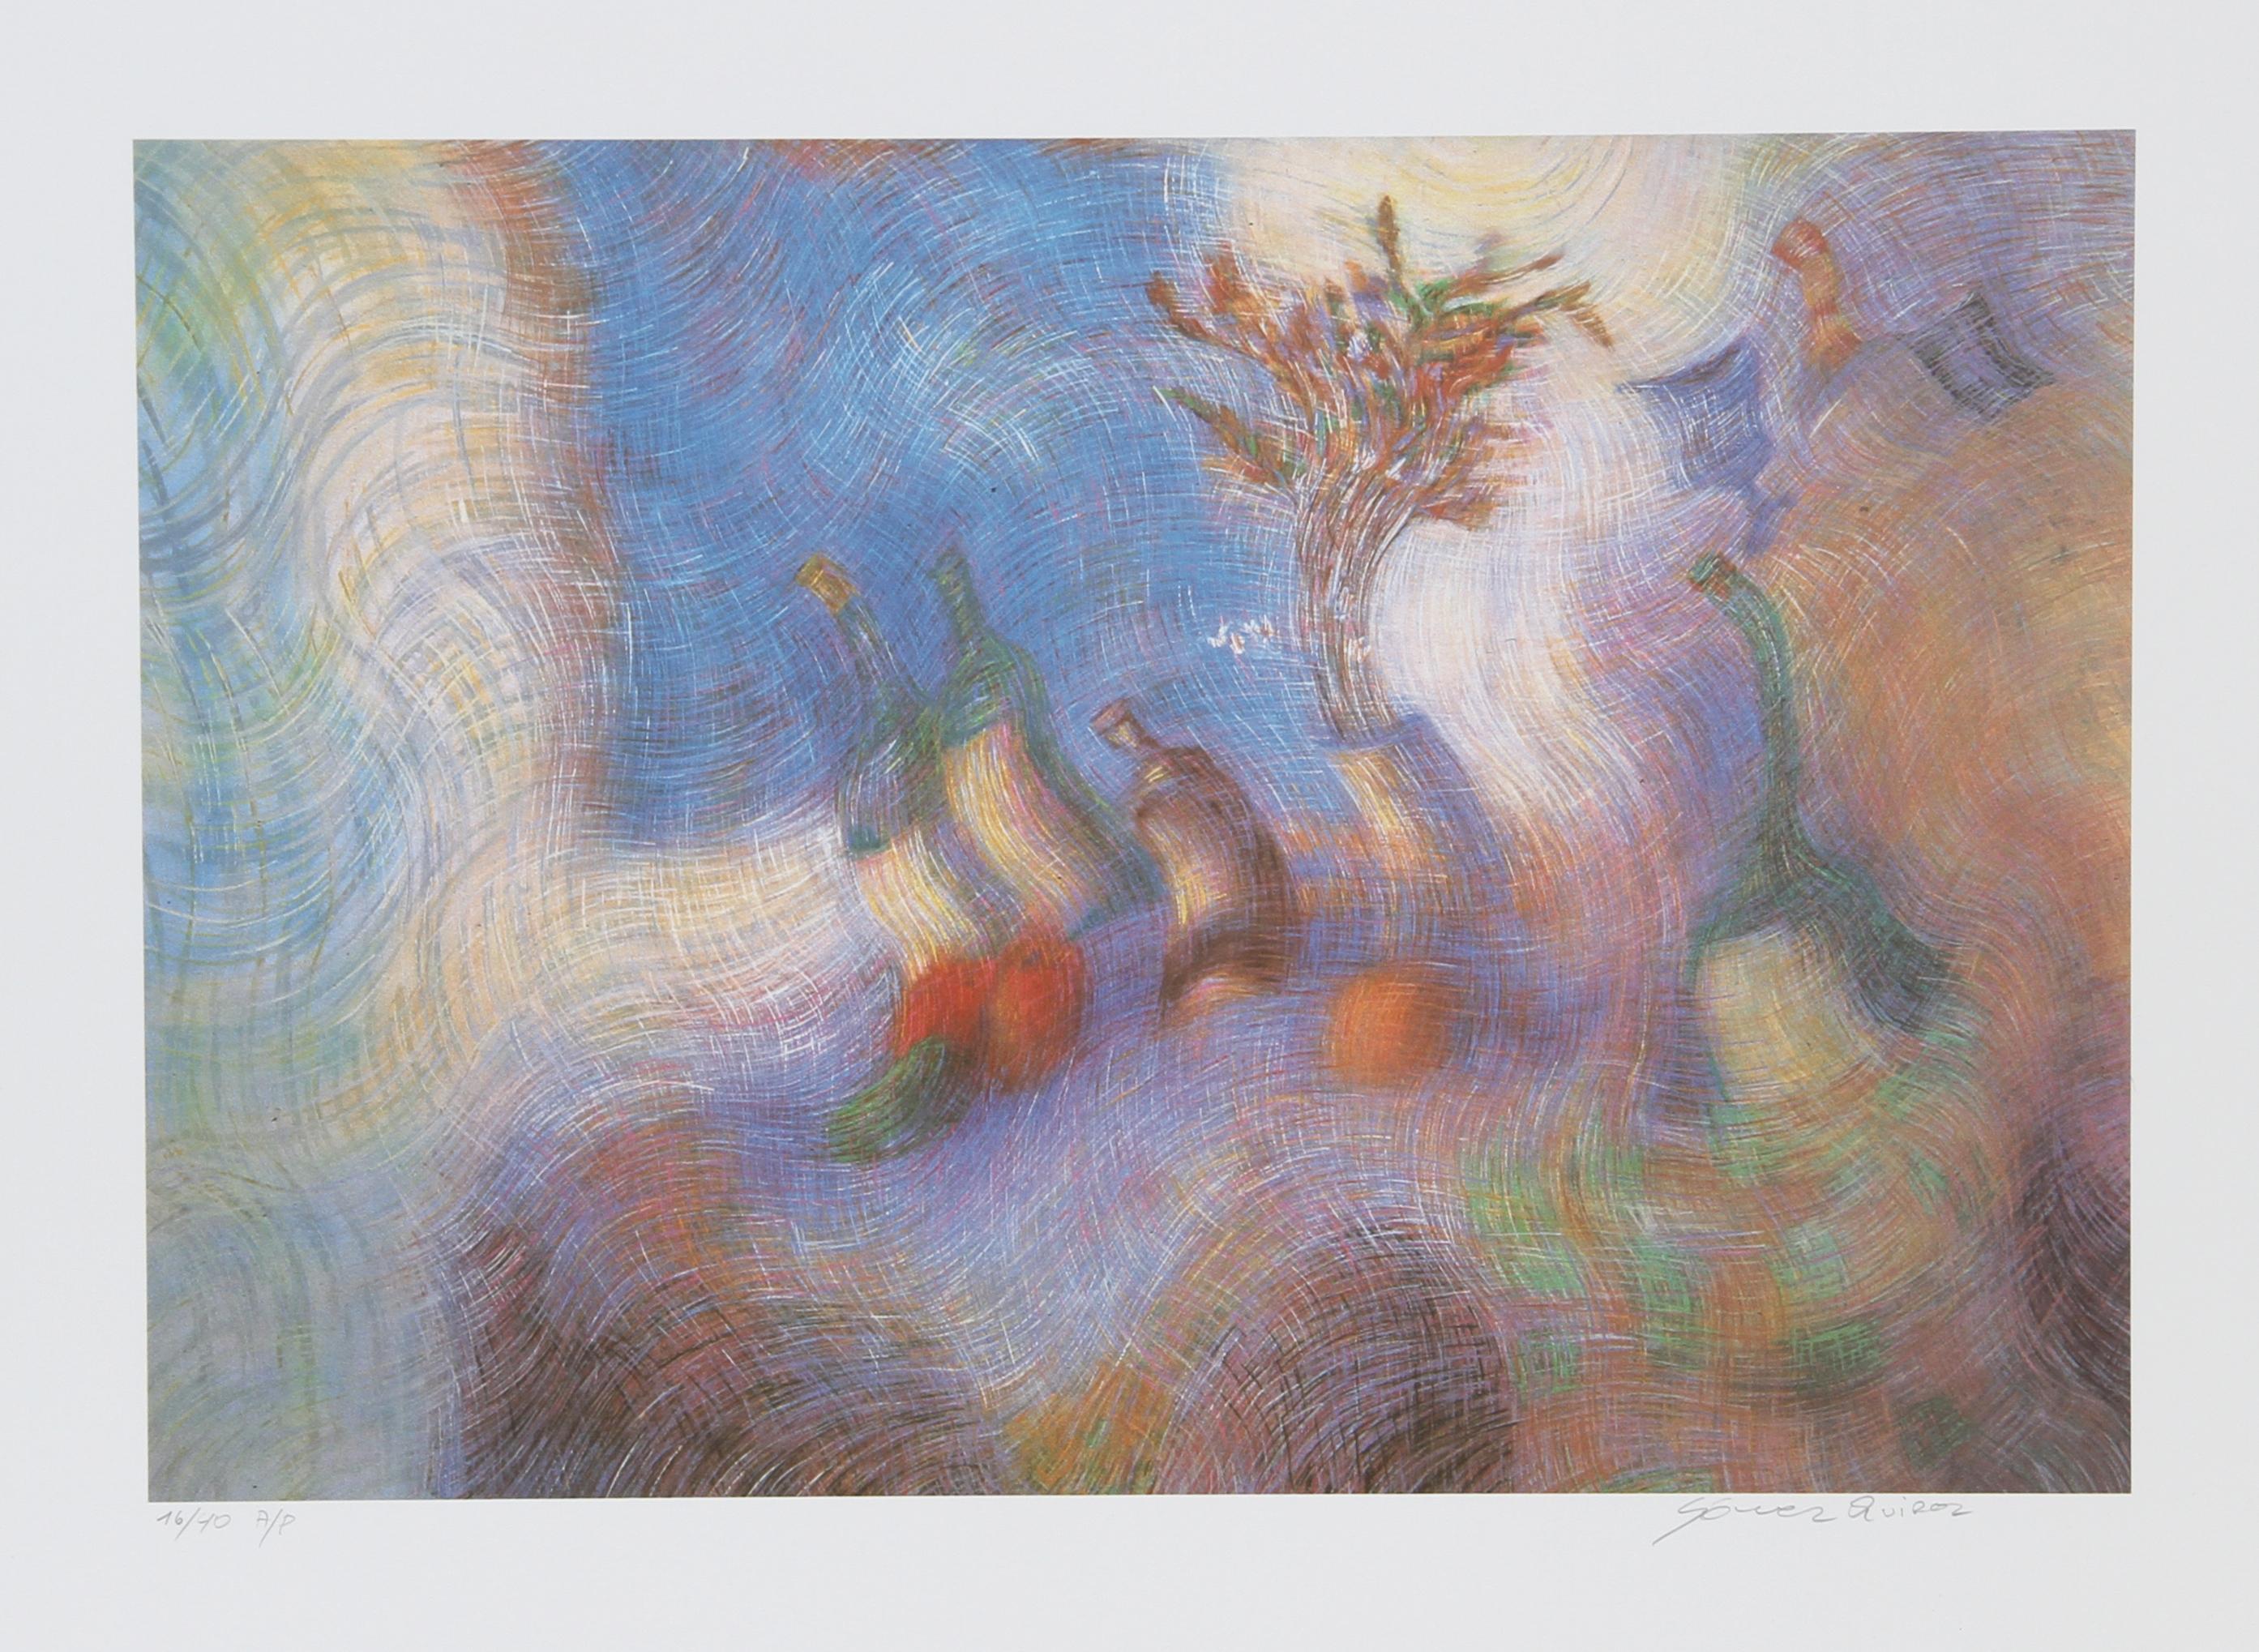 Bodegon 31, Surreal Still Life Lithograph by Quiroz